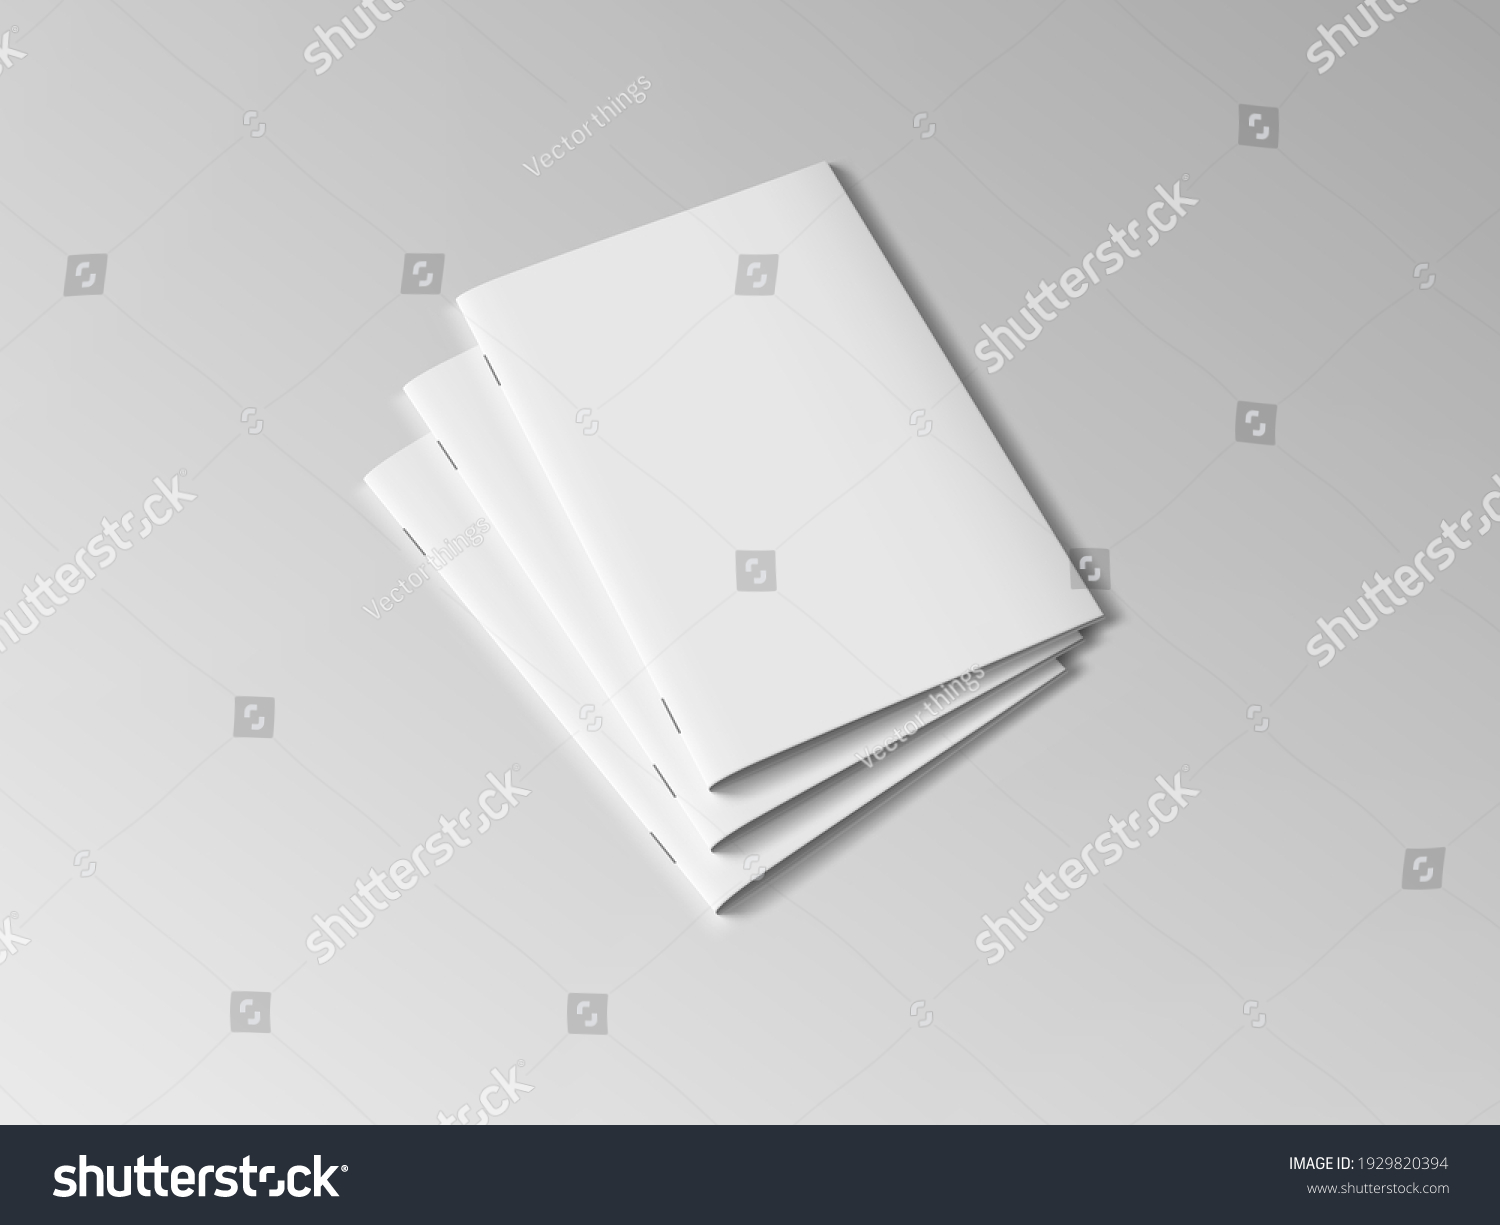 Three A4 Or A5 Clear Brochures With Shadow. EPS10 Vector #1929820394